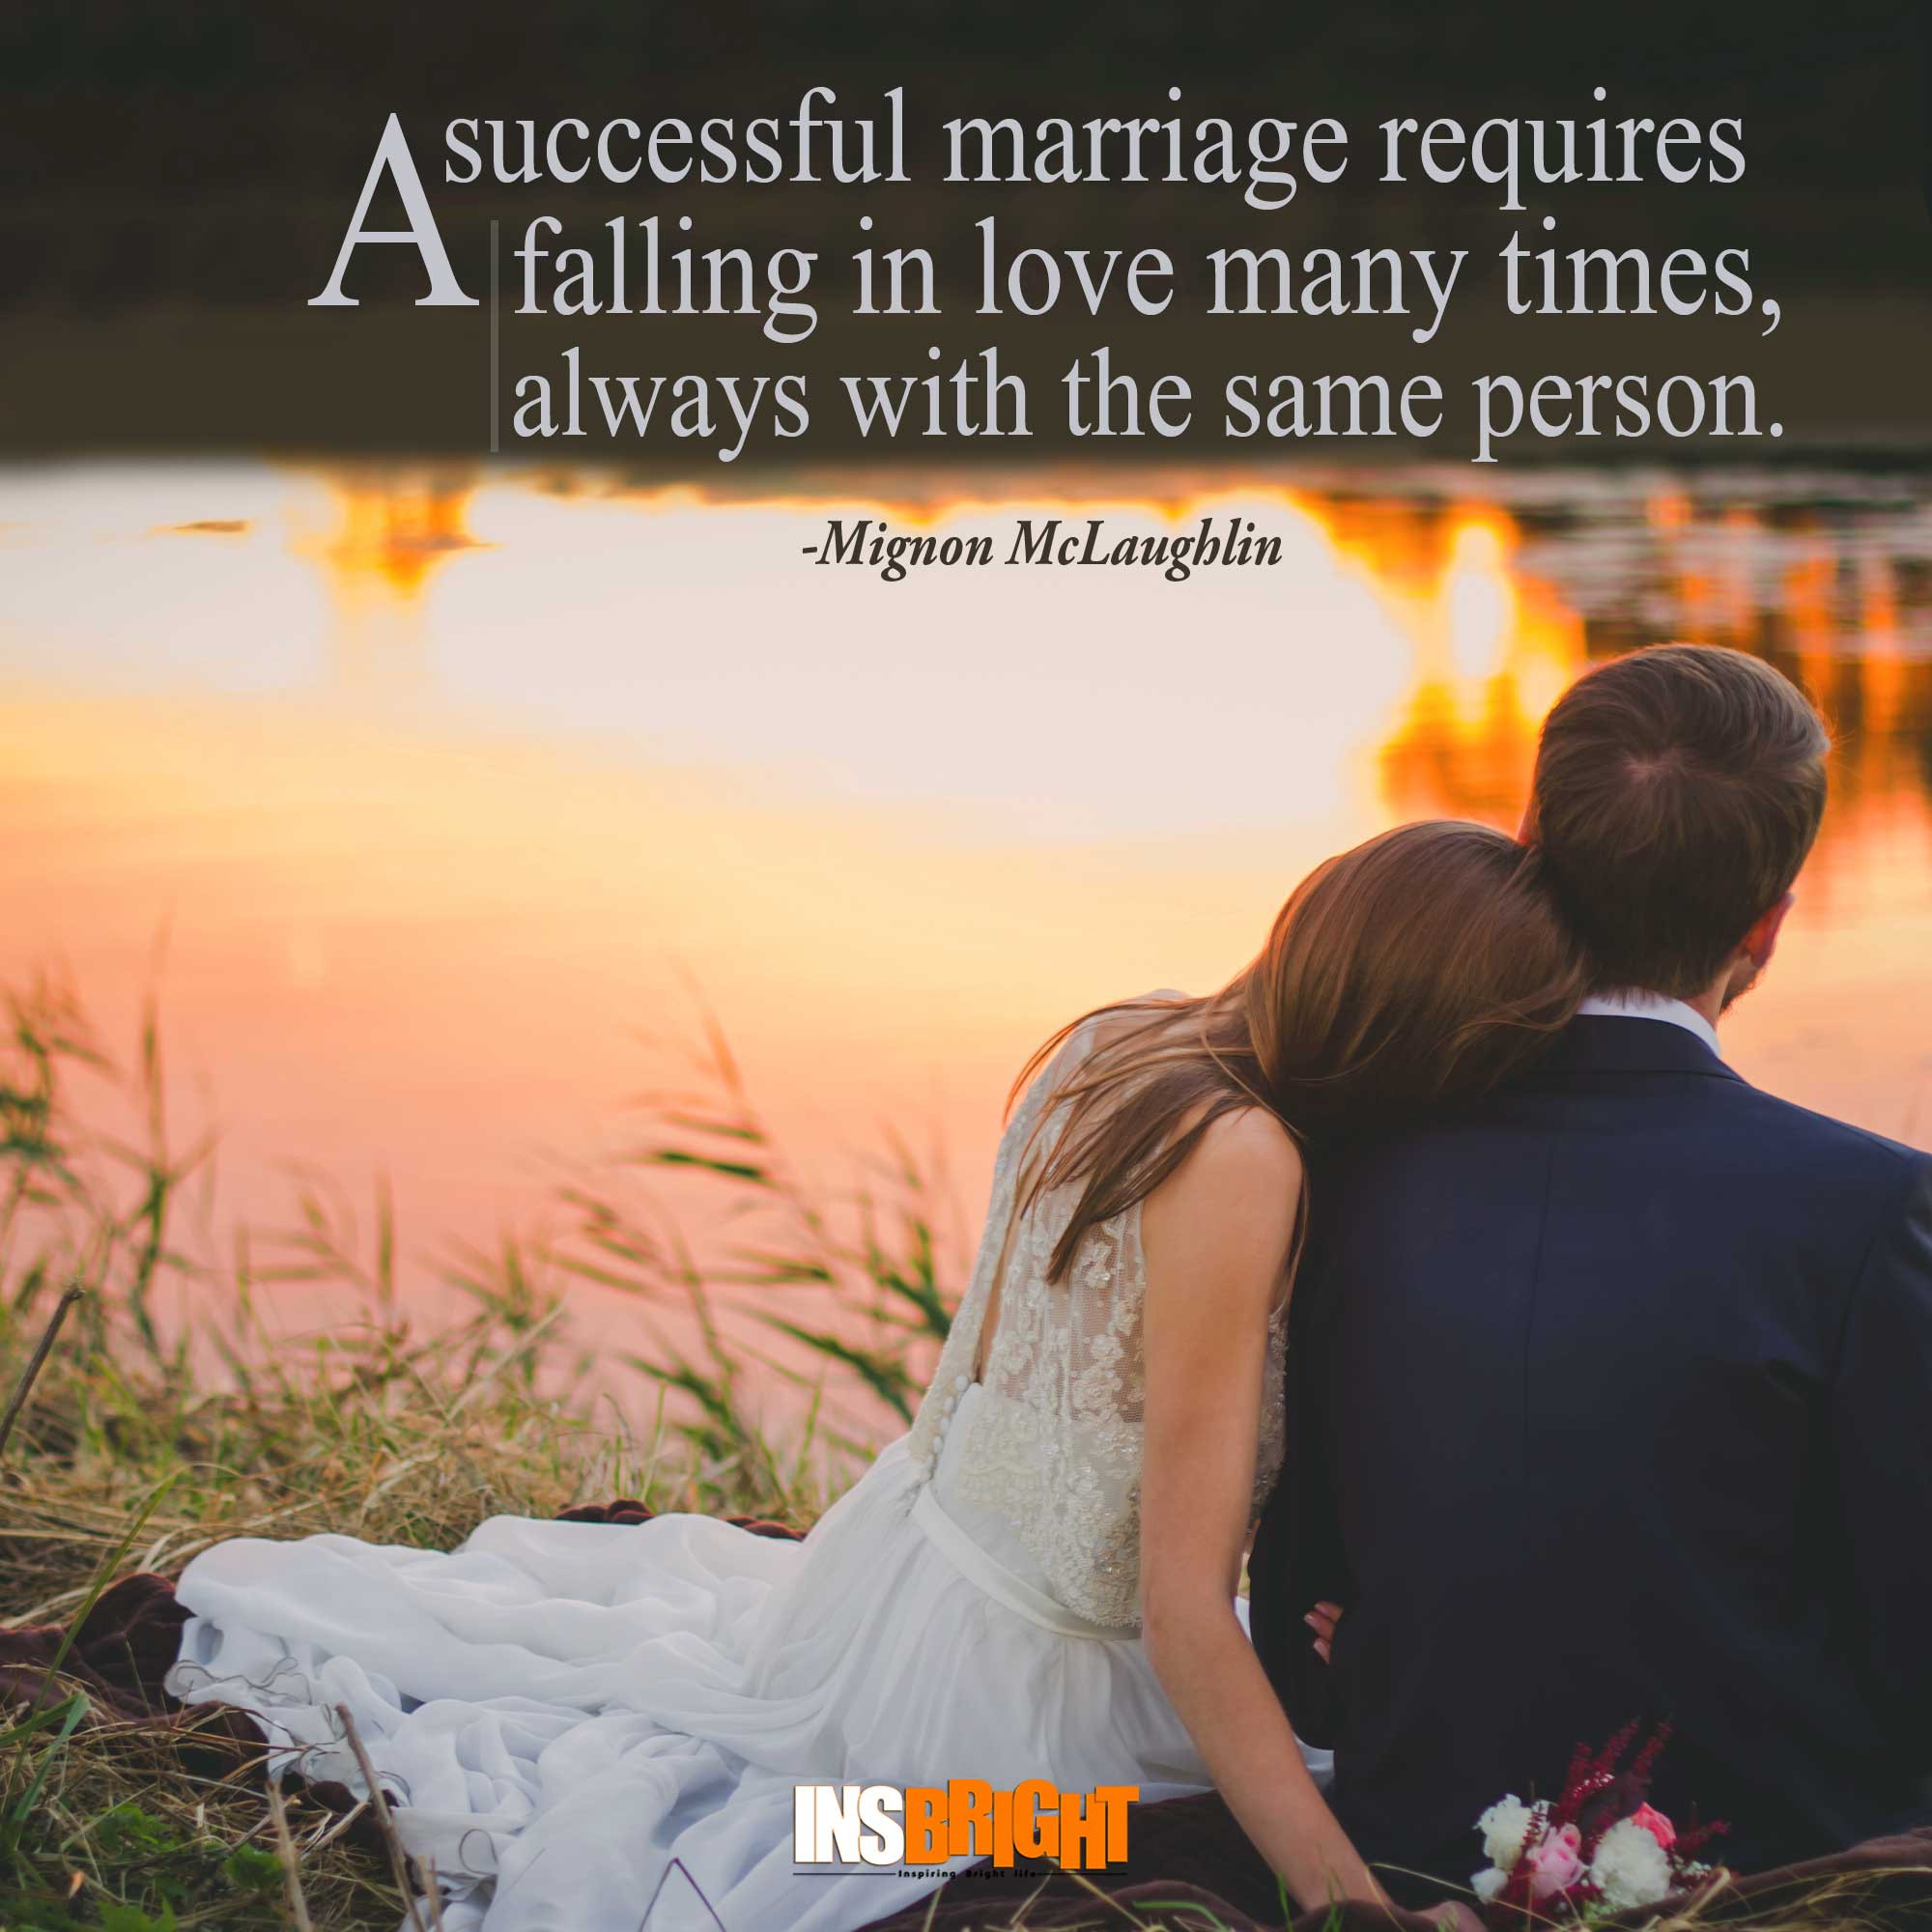 Best Marriage Quotes
 Inspirational Marriage Quotes By Famous People With